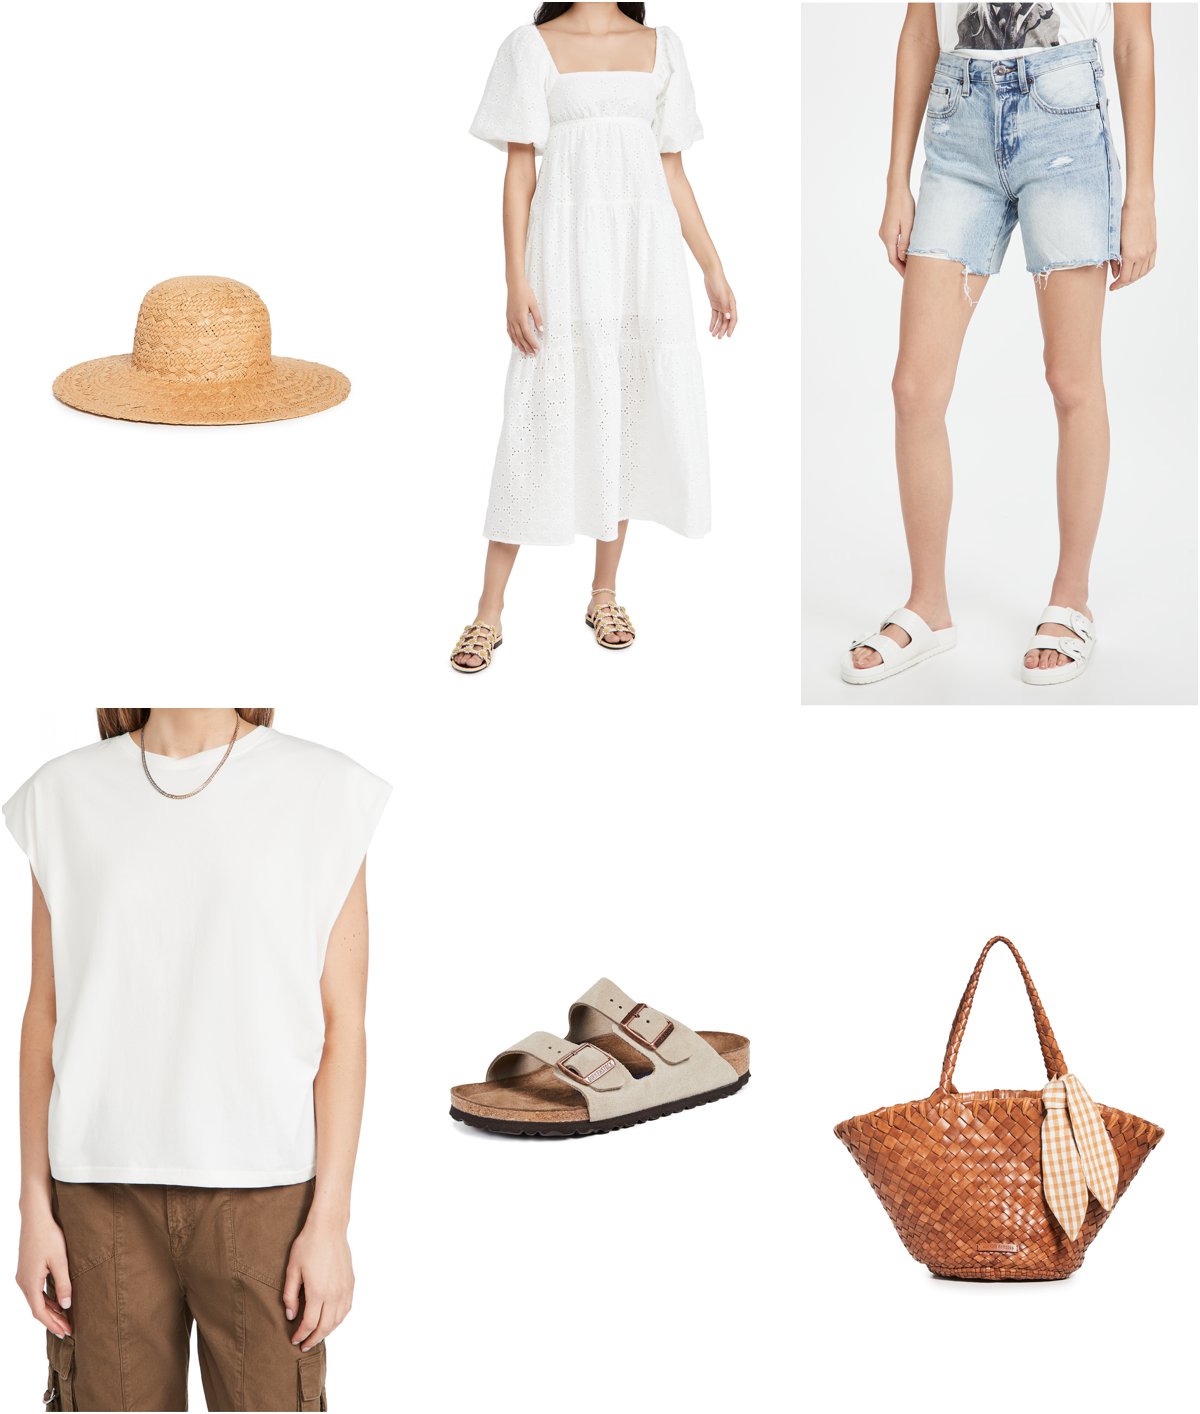 Shopbop summer style 2021, best shorts, sandals and accessories